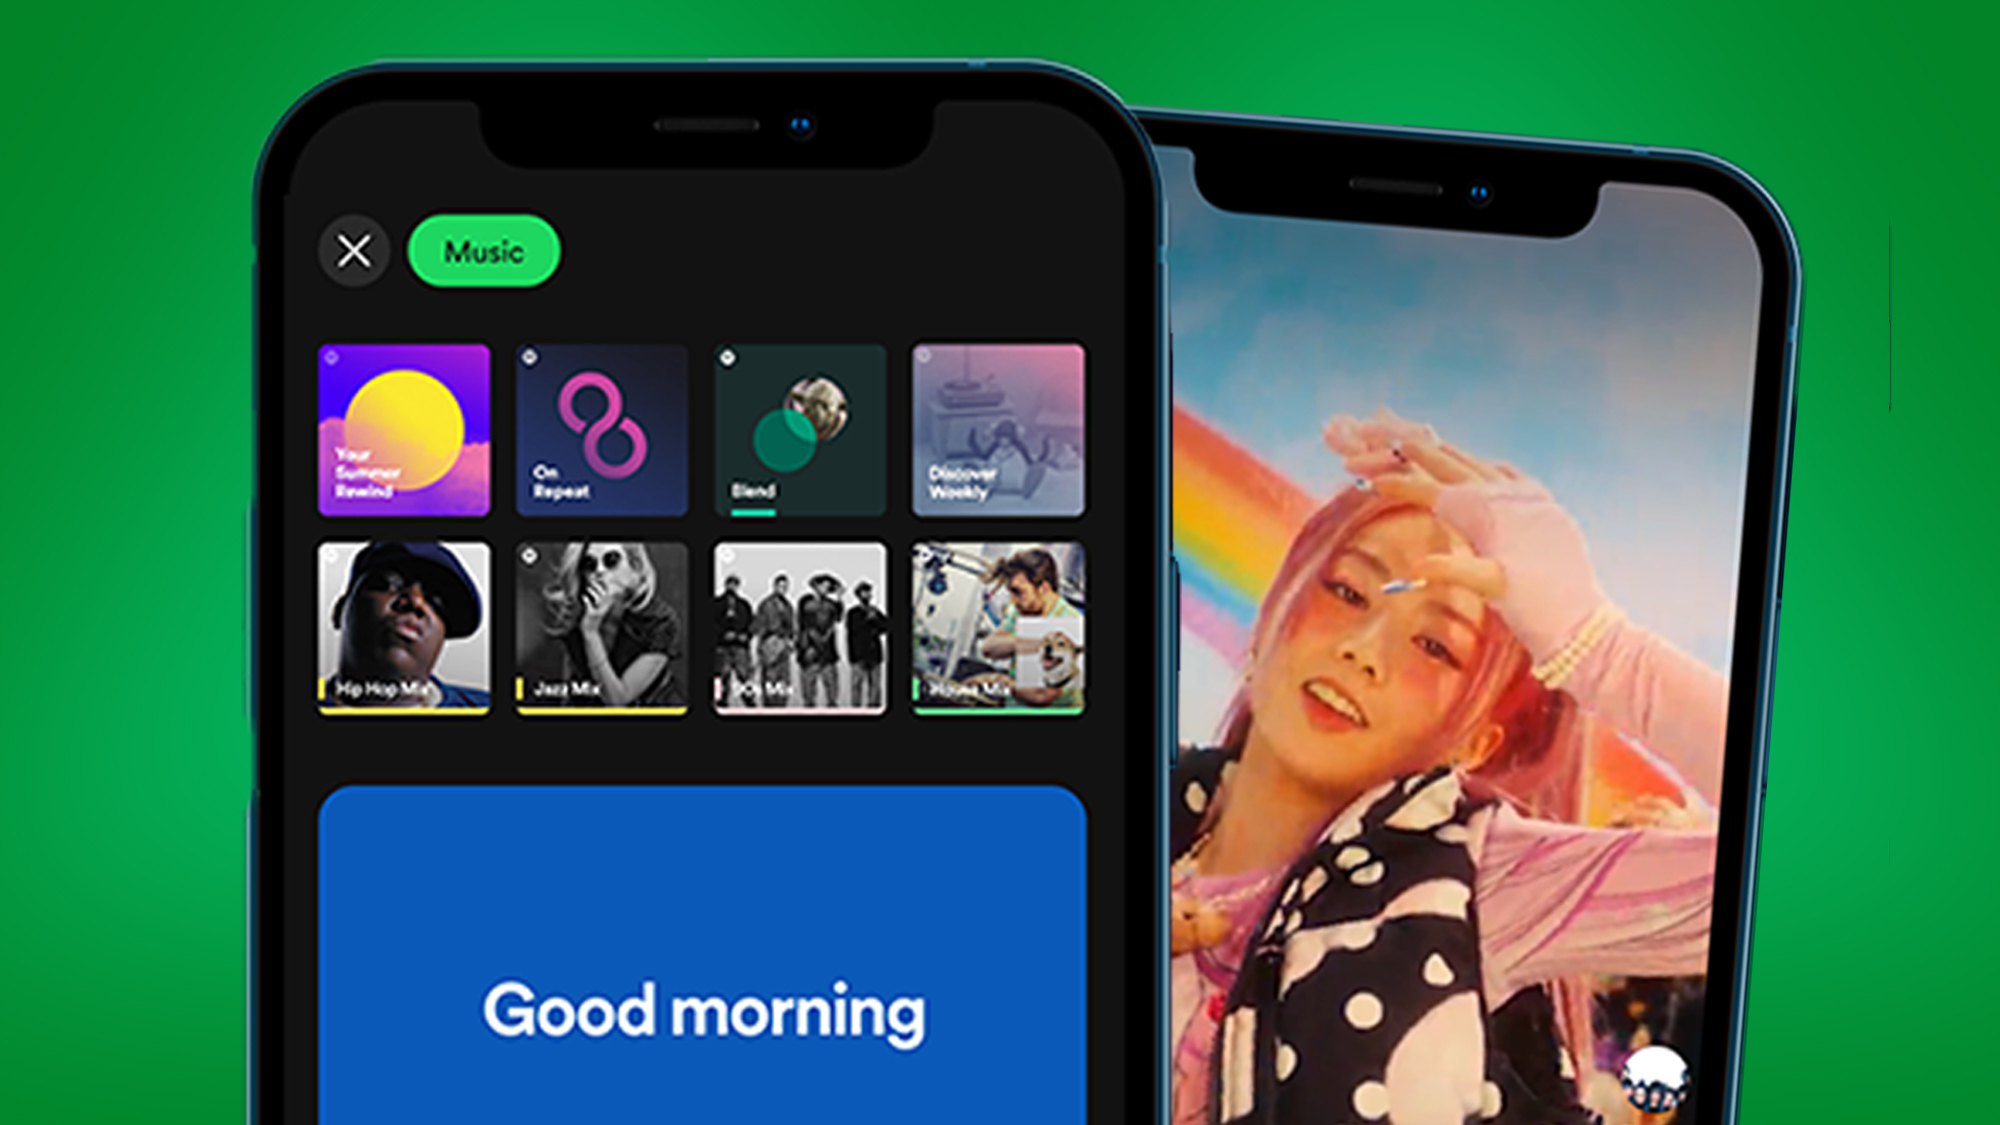 The 15 best Spotify tips and tricks – how to master the streaming service